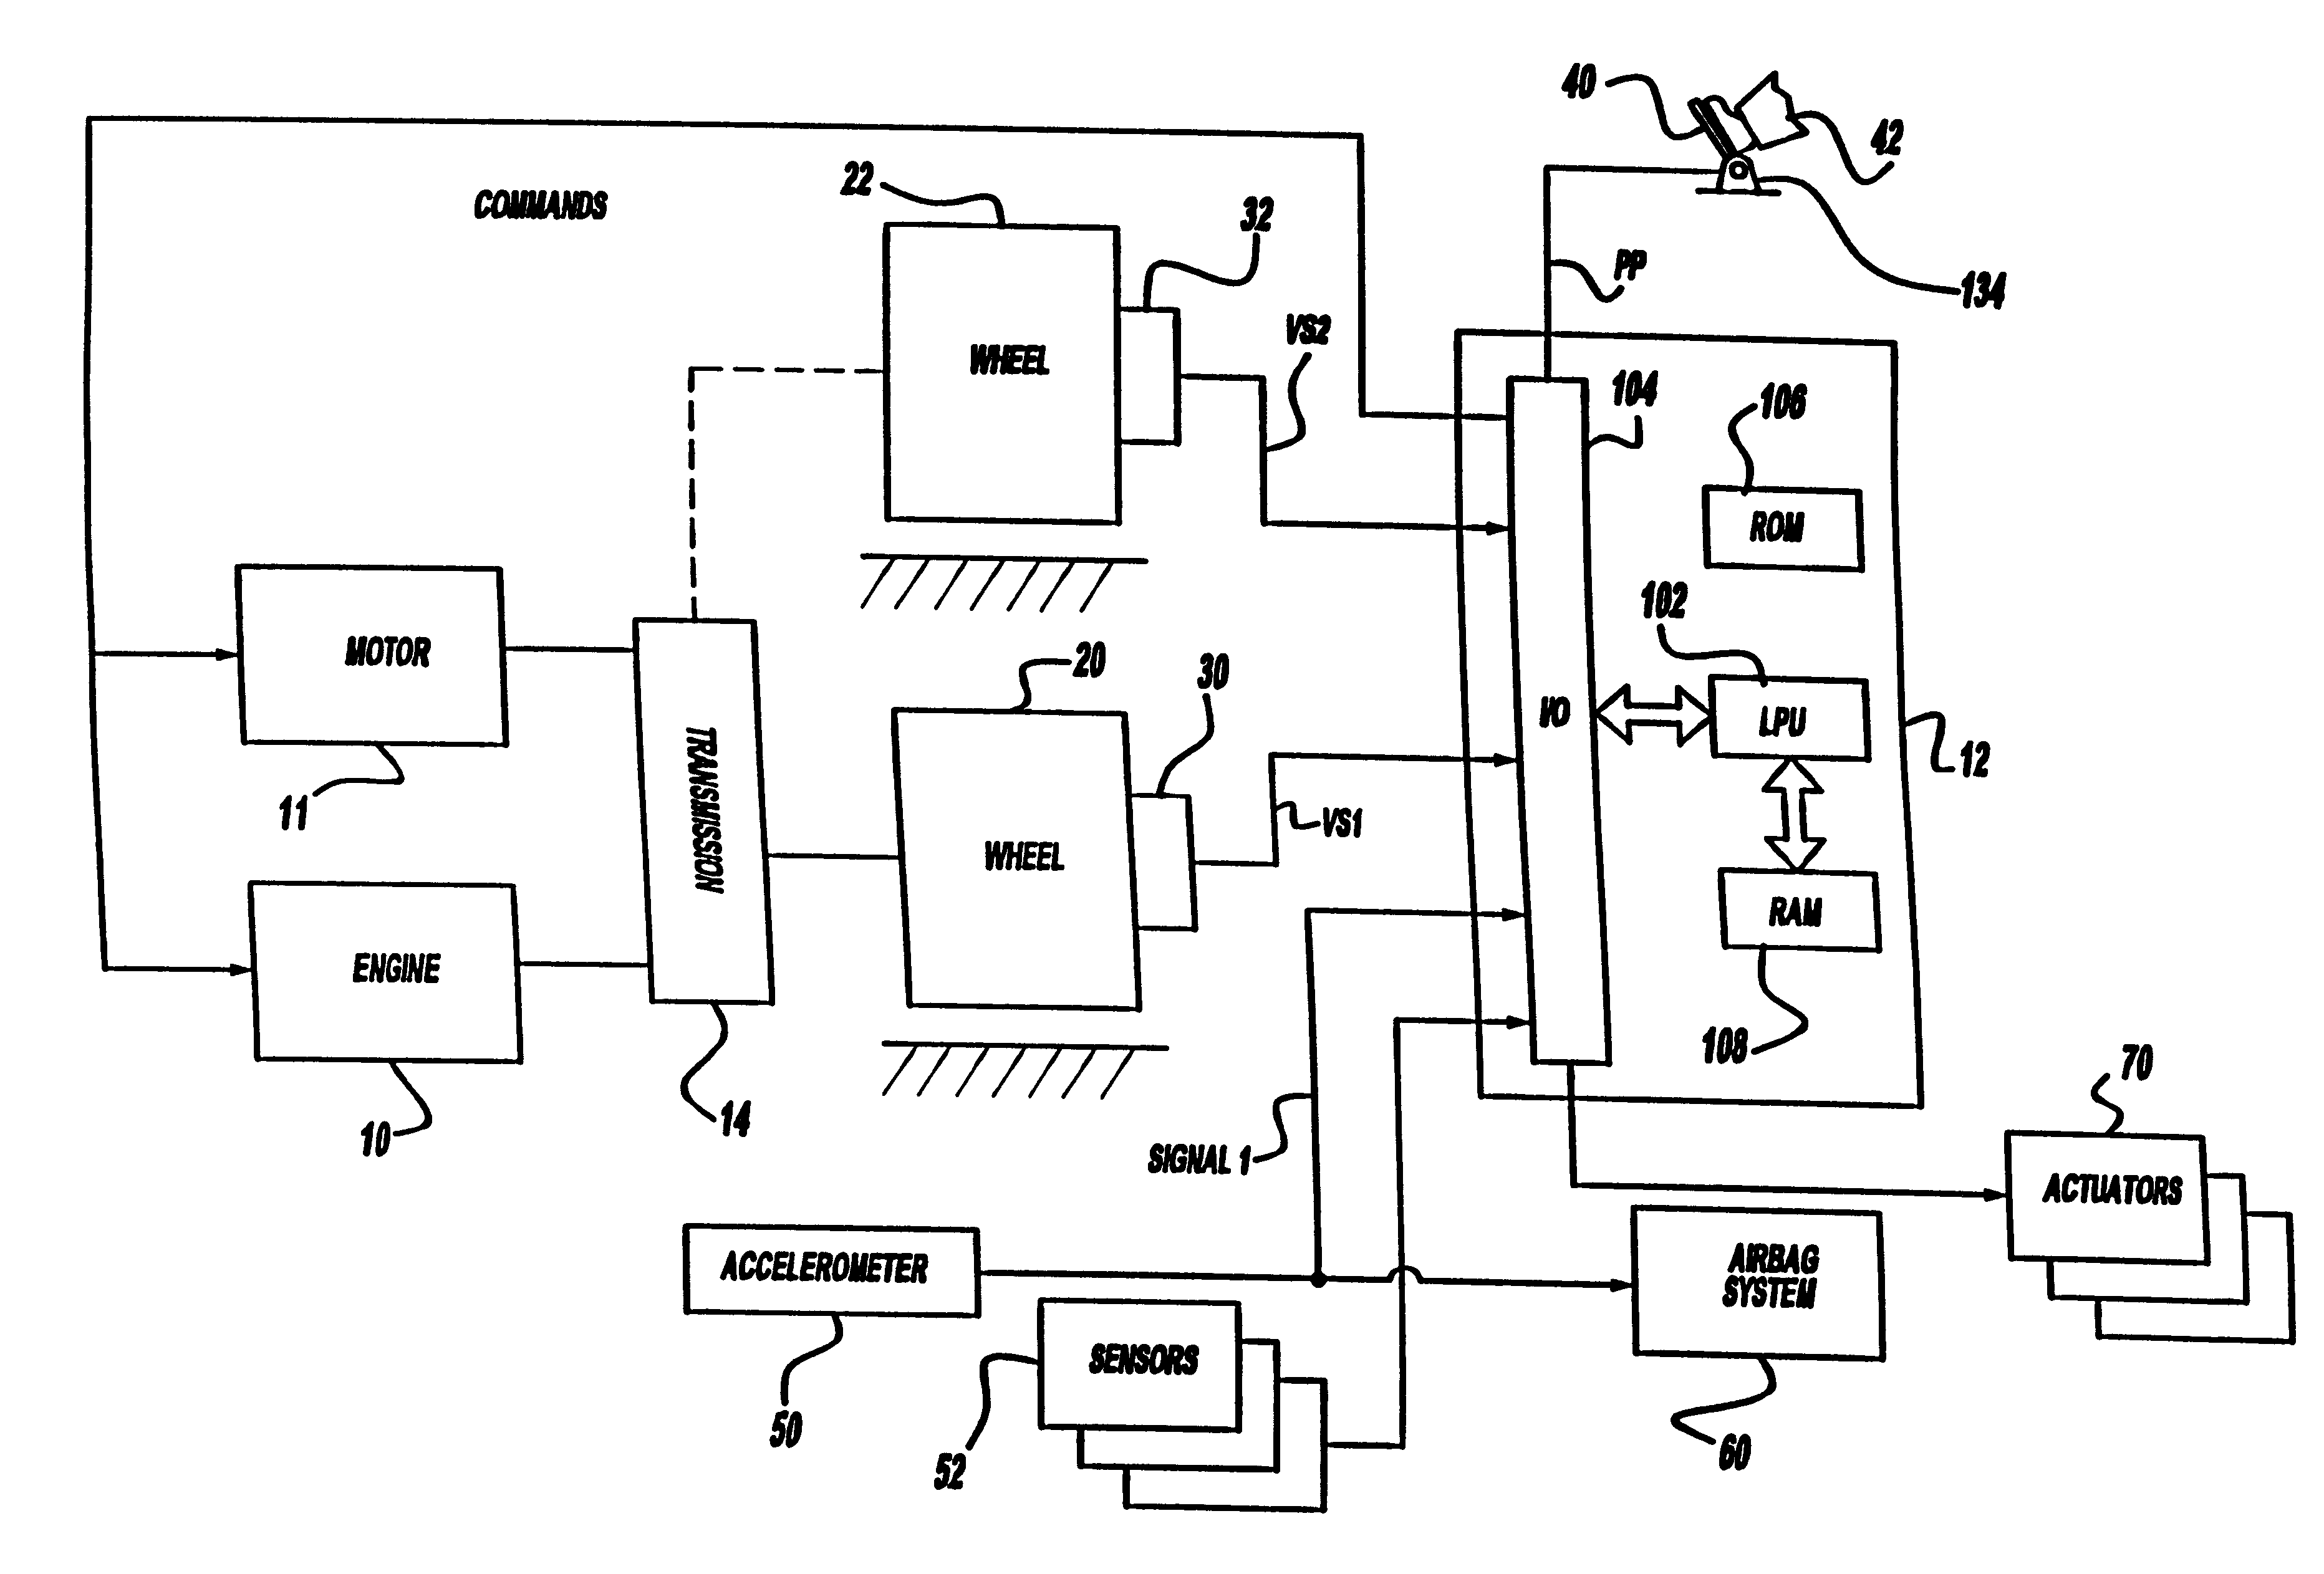 Engine control monitor for vehicle equipped with engine and transmission